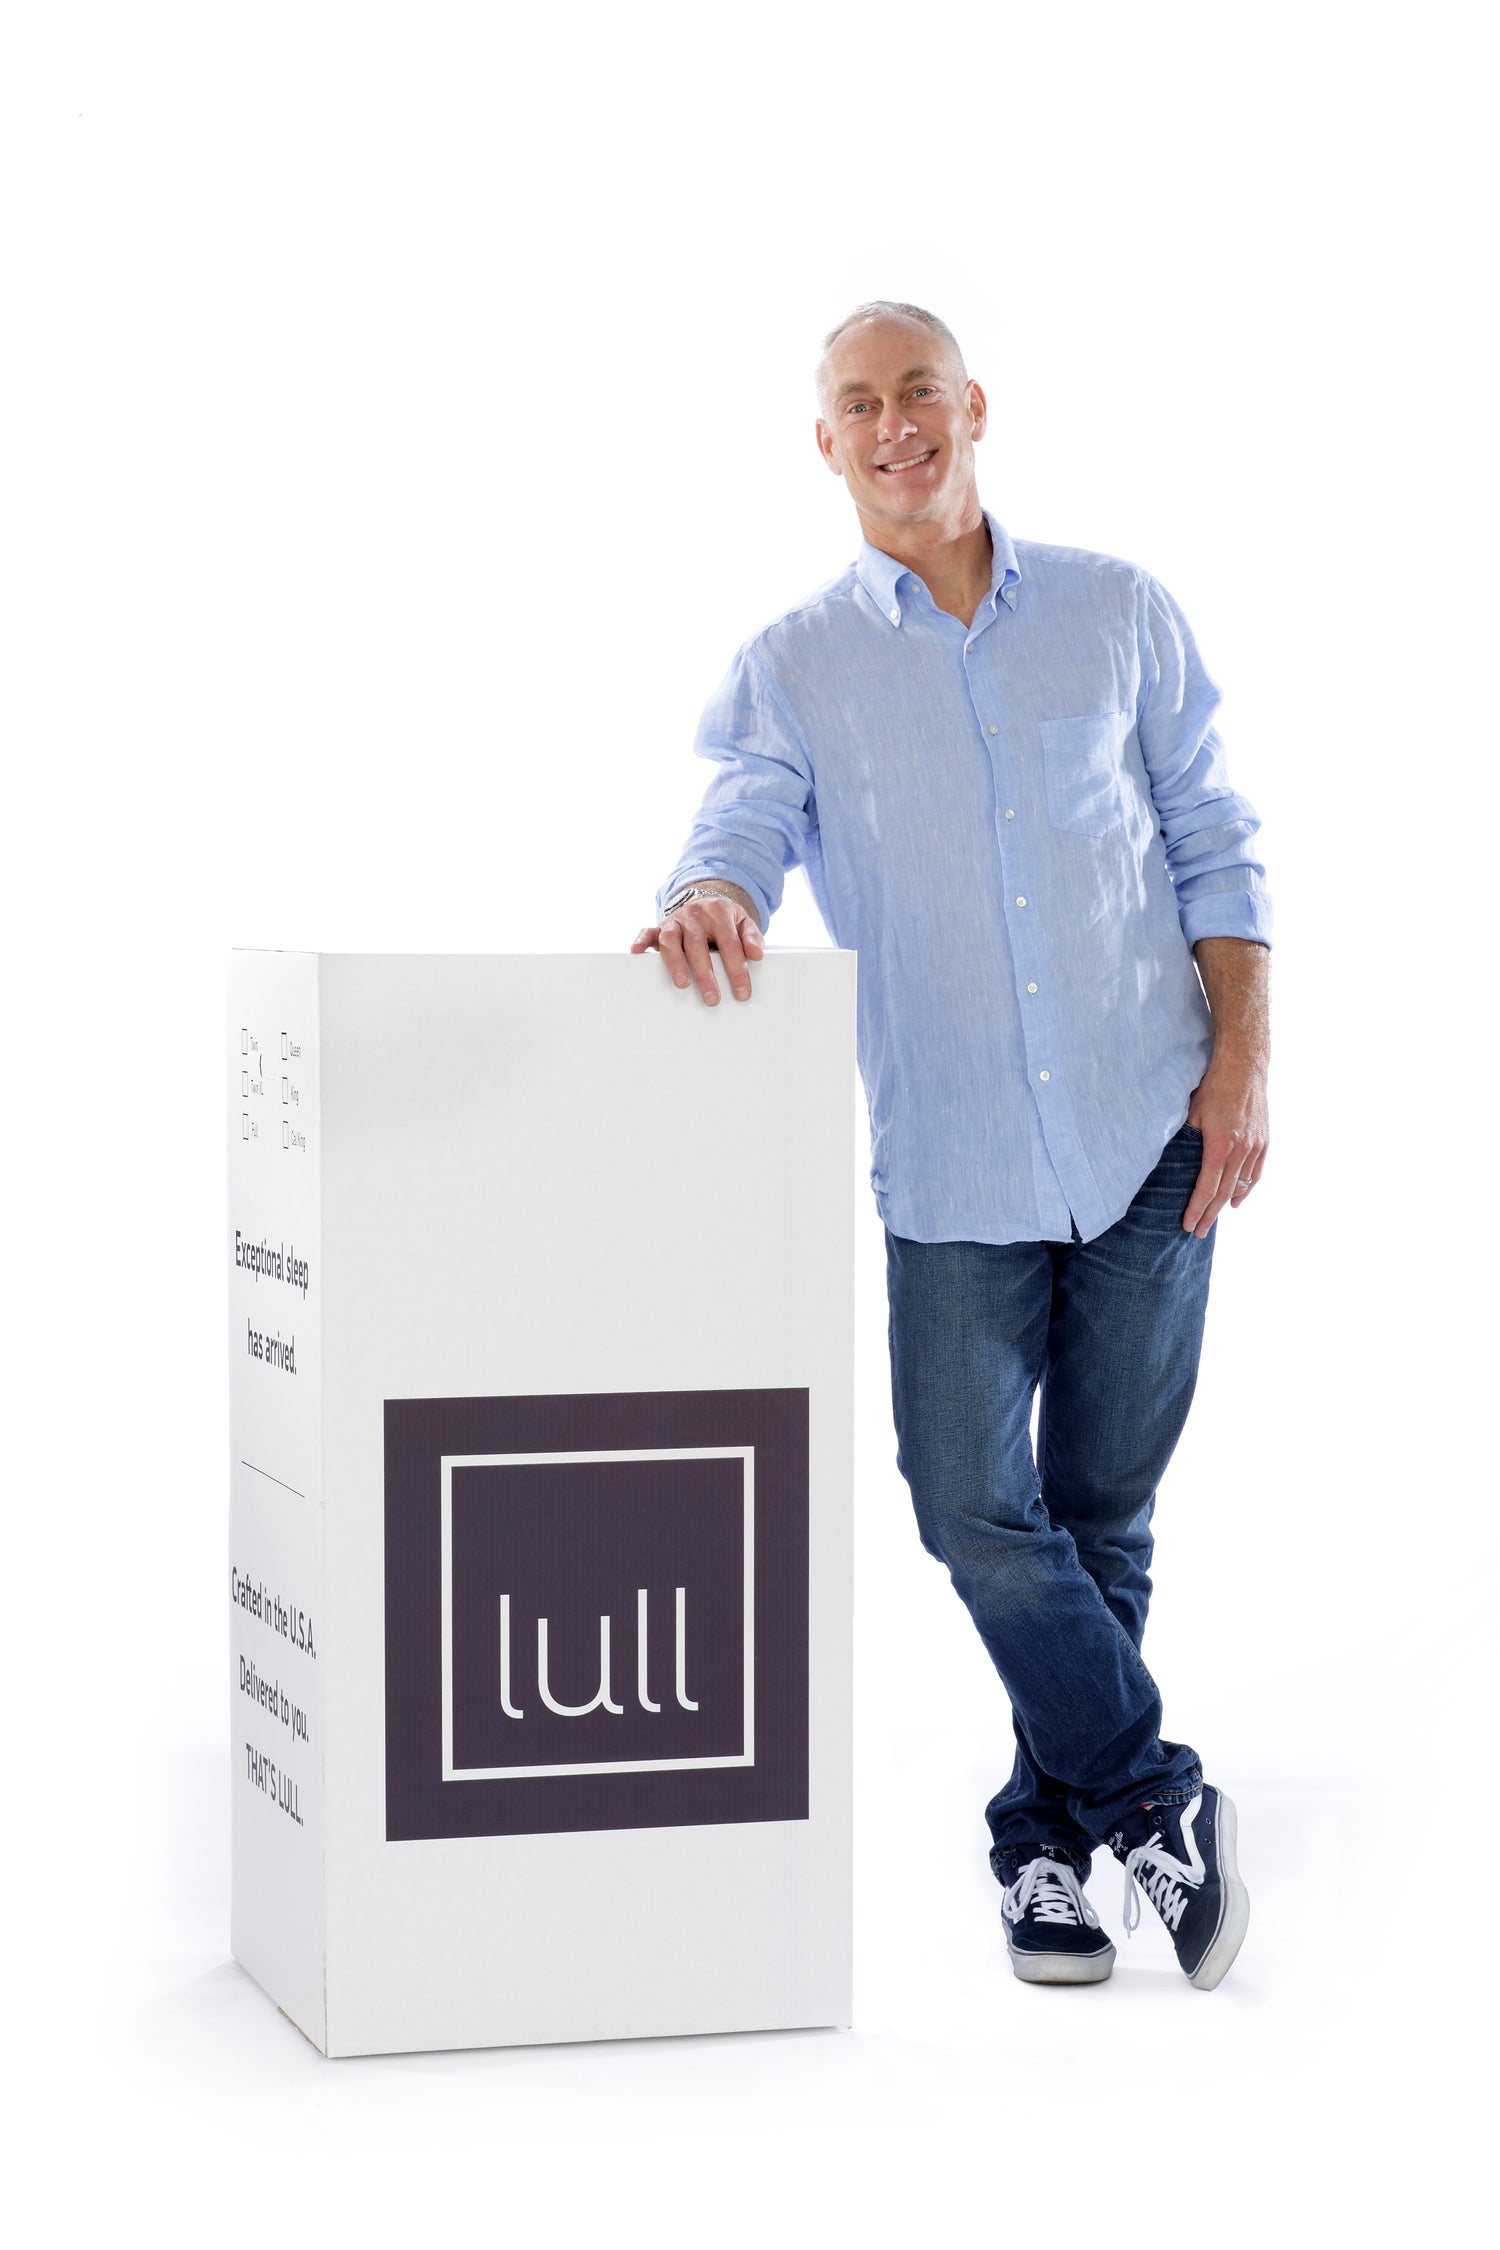 Sven, a founder of lull, leaning against a mattress box.